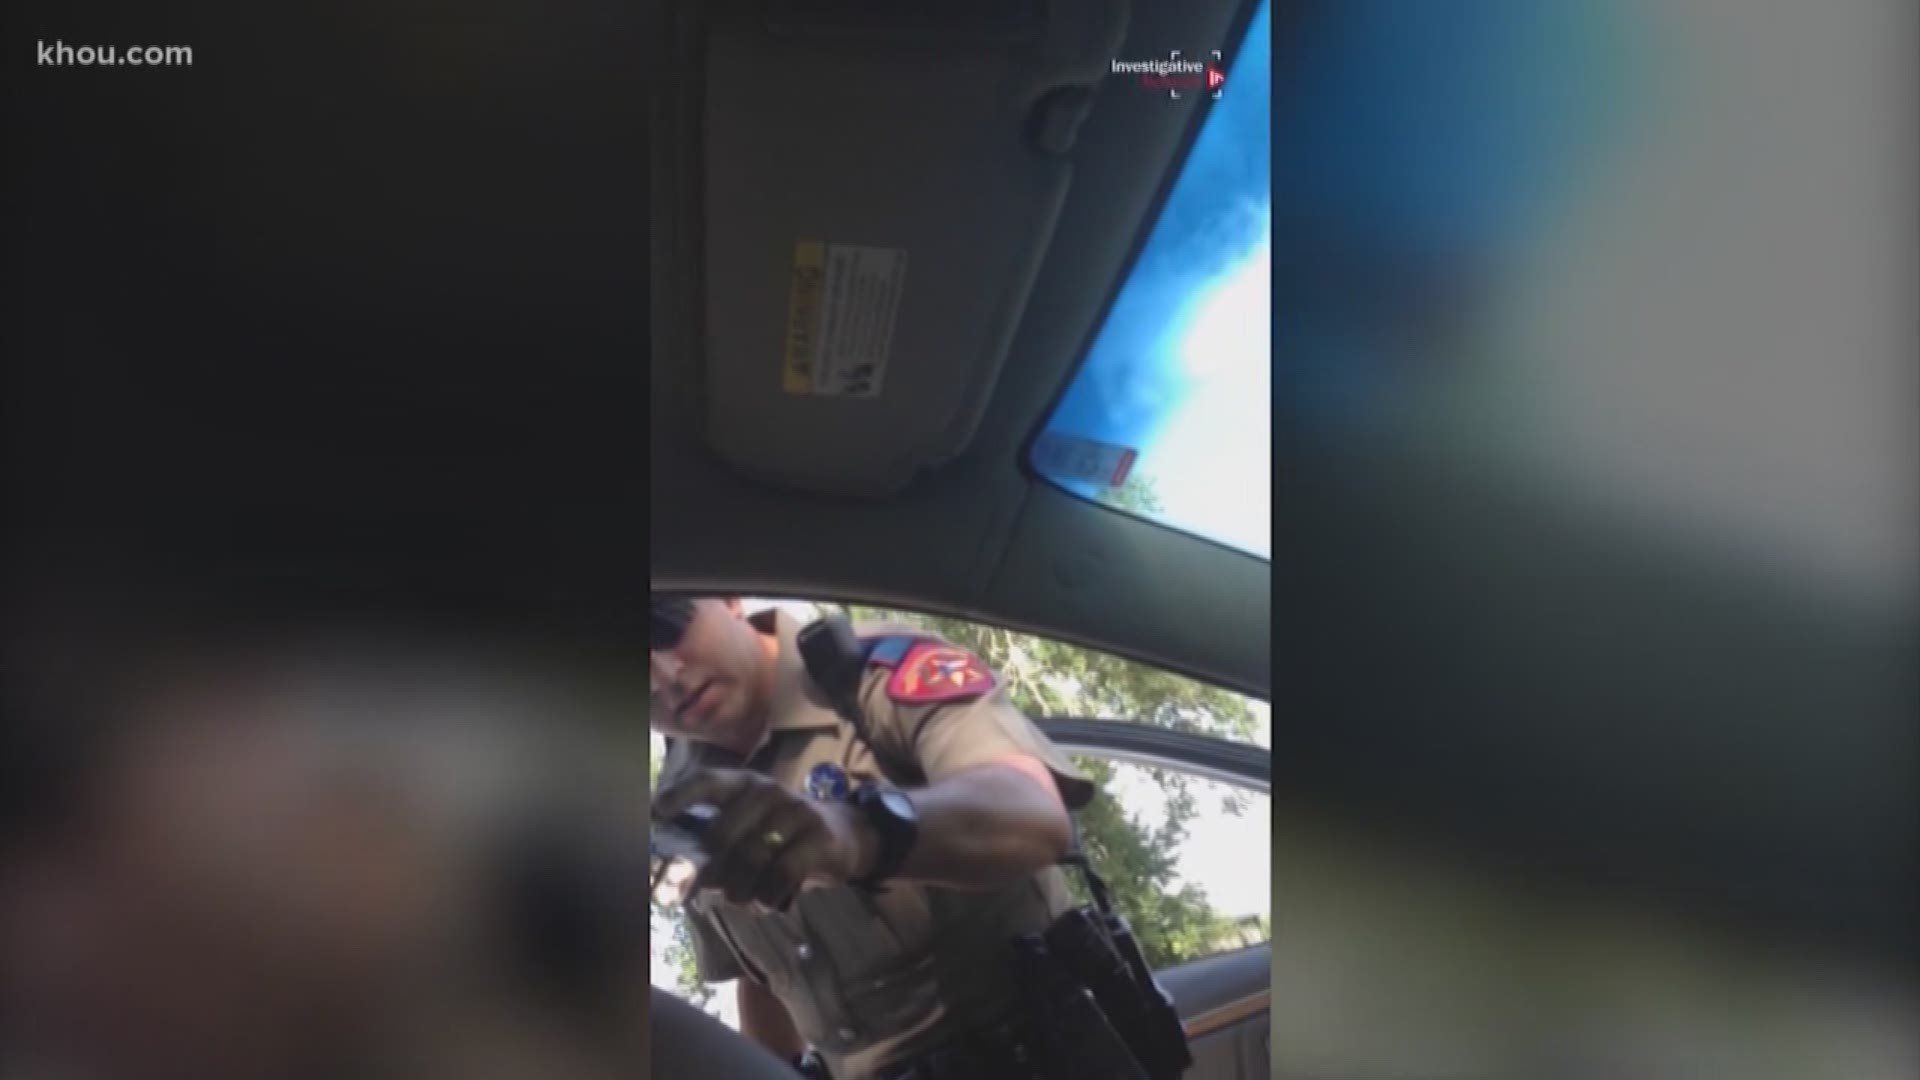 State lawmakers grilled DPS leaders about why this video of Sandra Bland's arrest wasn't seen until a reporter released it earlier this month.